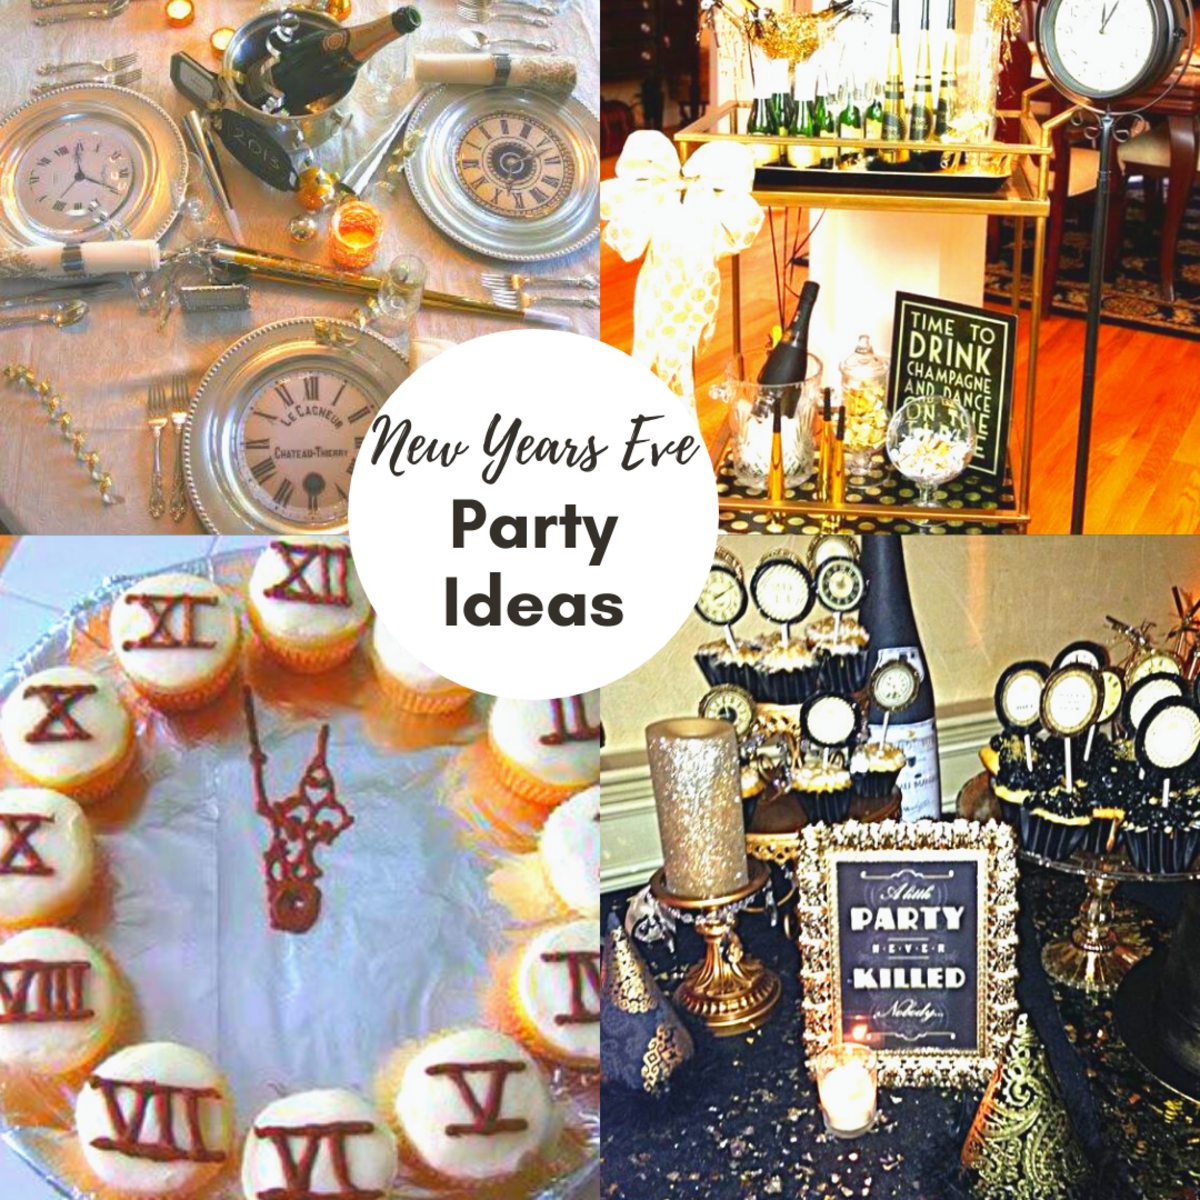 Black & Gold New Years Eve Party Ideas to Get the Party Started